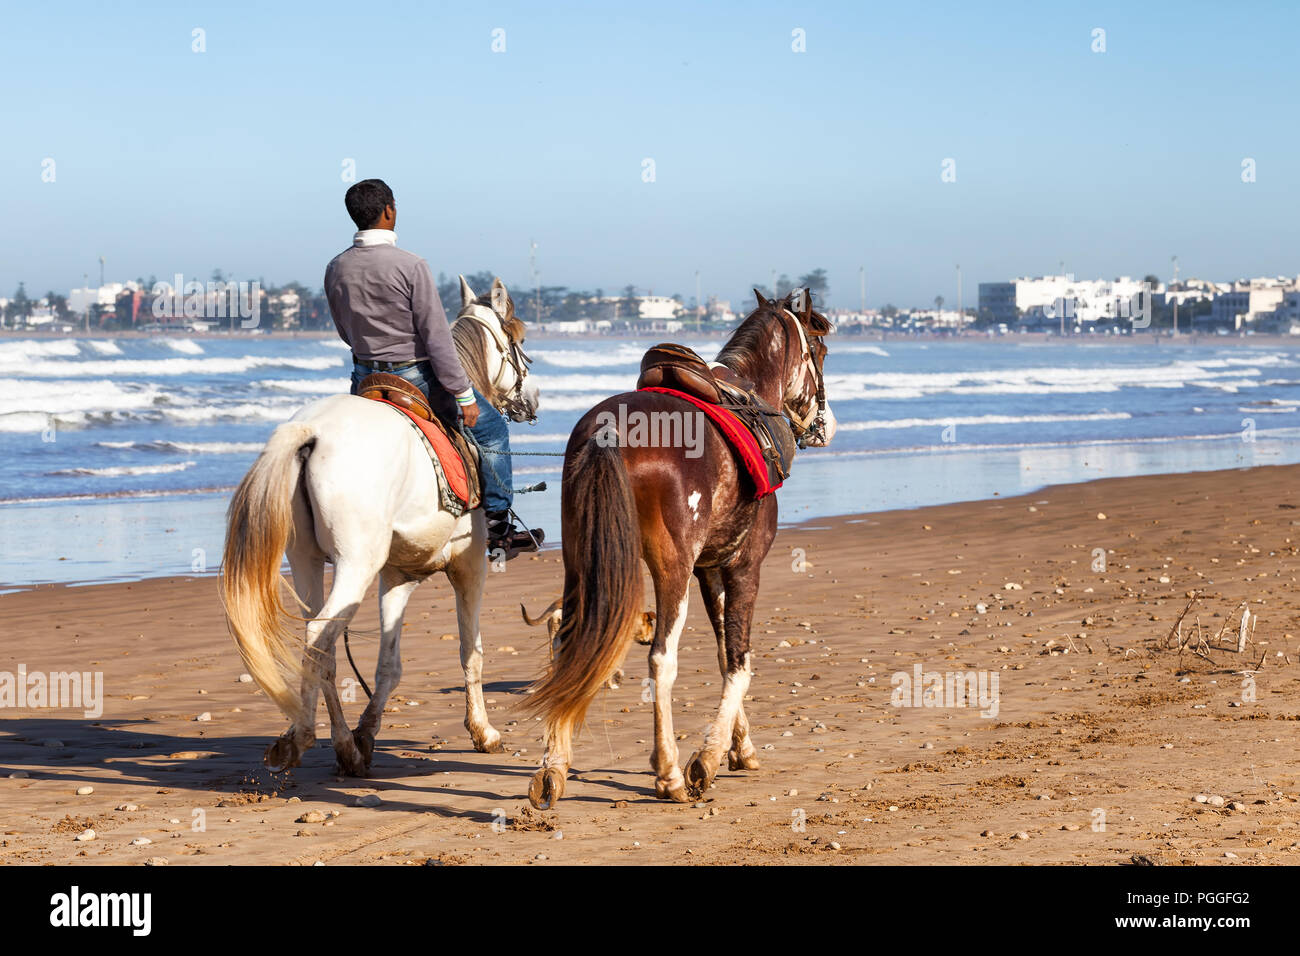 Morocco, Essaouira beach. Local man on horseback with a second riderless horse. Town seen in the background. Stock Photo